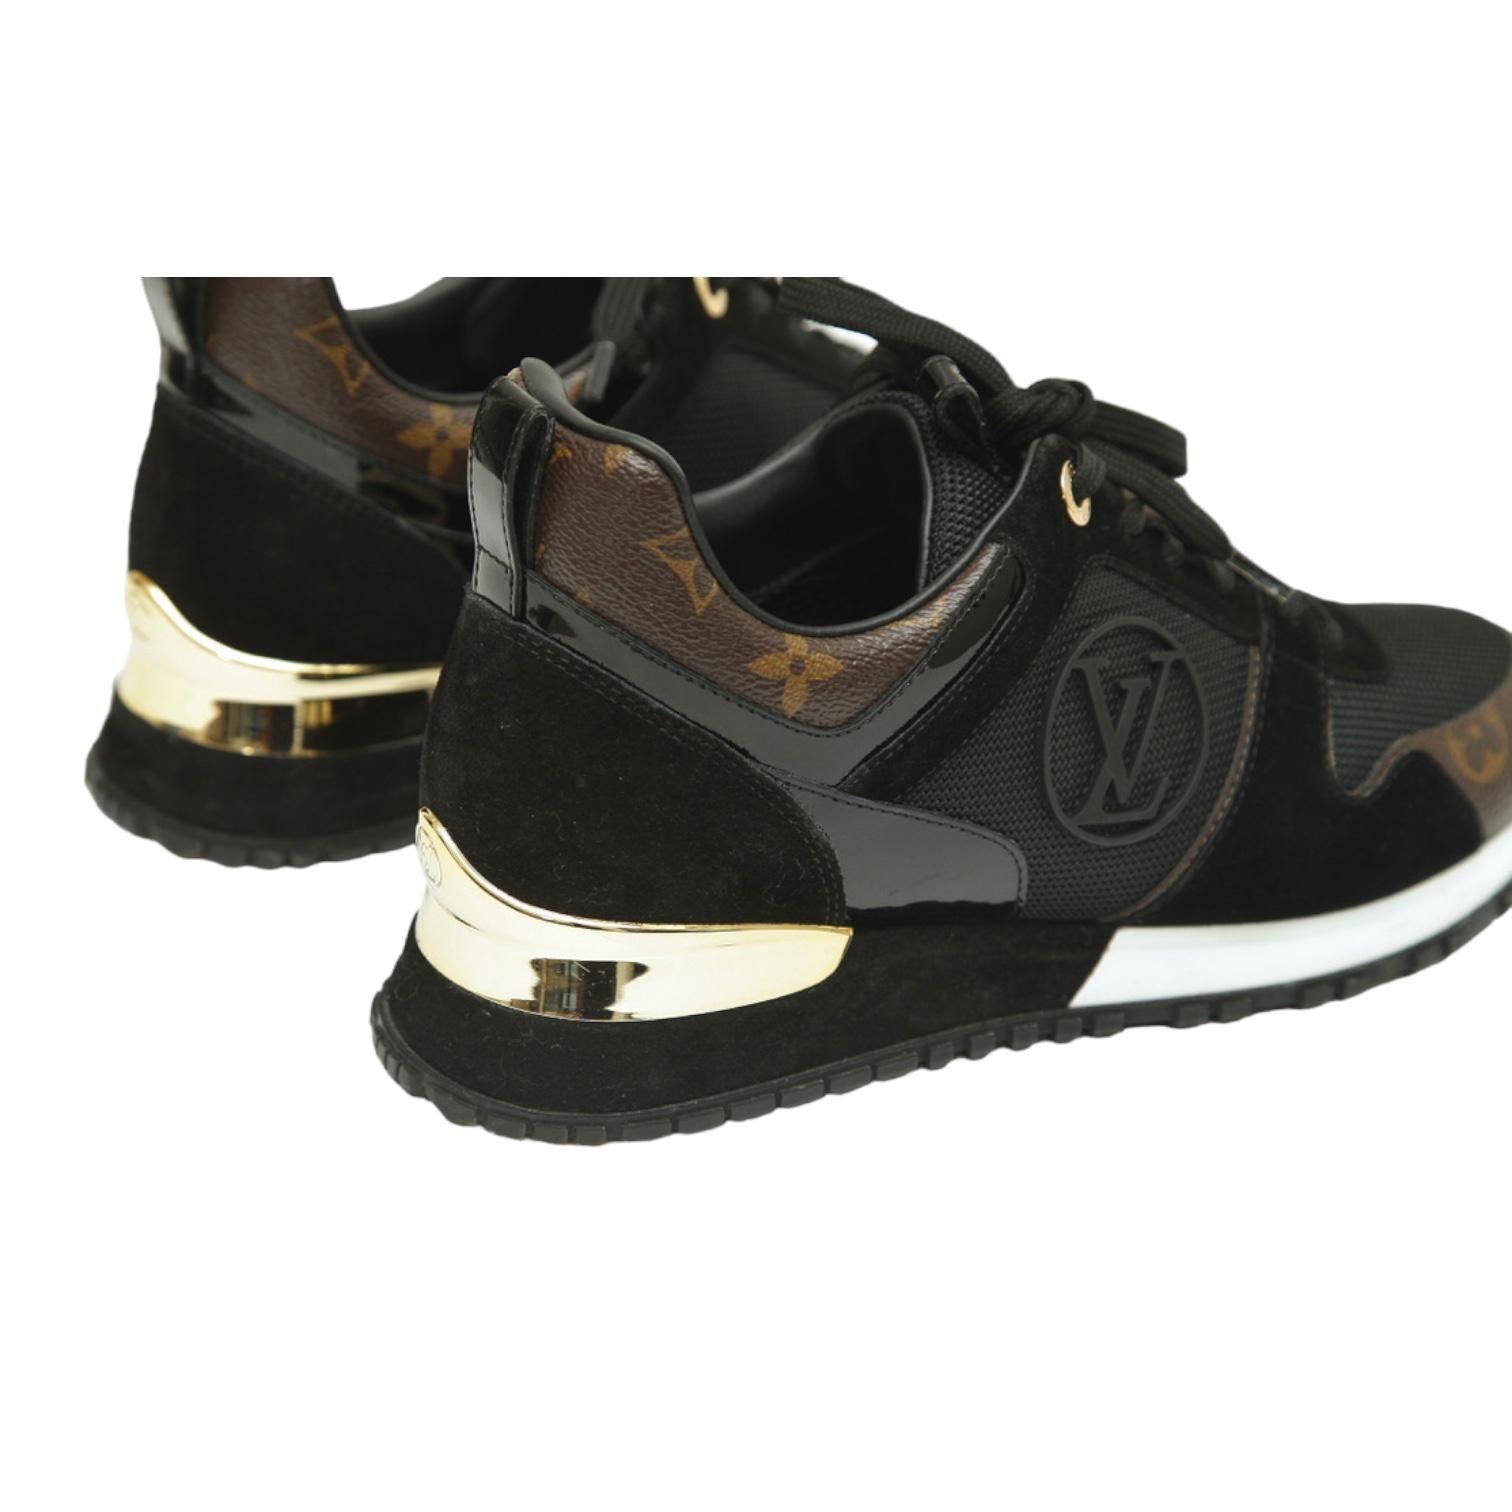 LOUIS VUITTON Sneakers RUN AWAY Black Suede Monogram Gold Lace Up Trainer Sz 38 For Sale 3